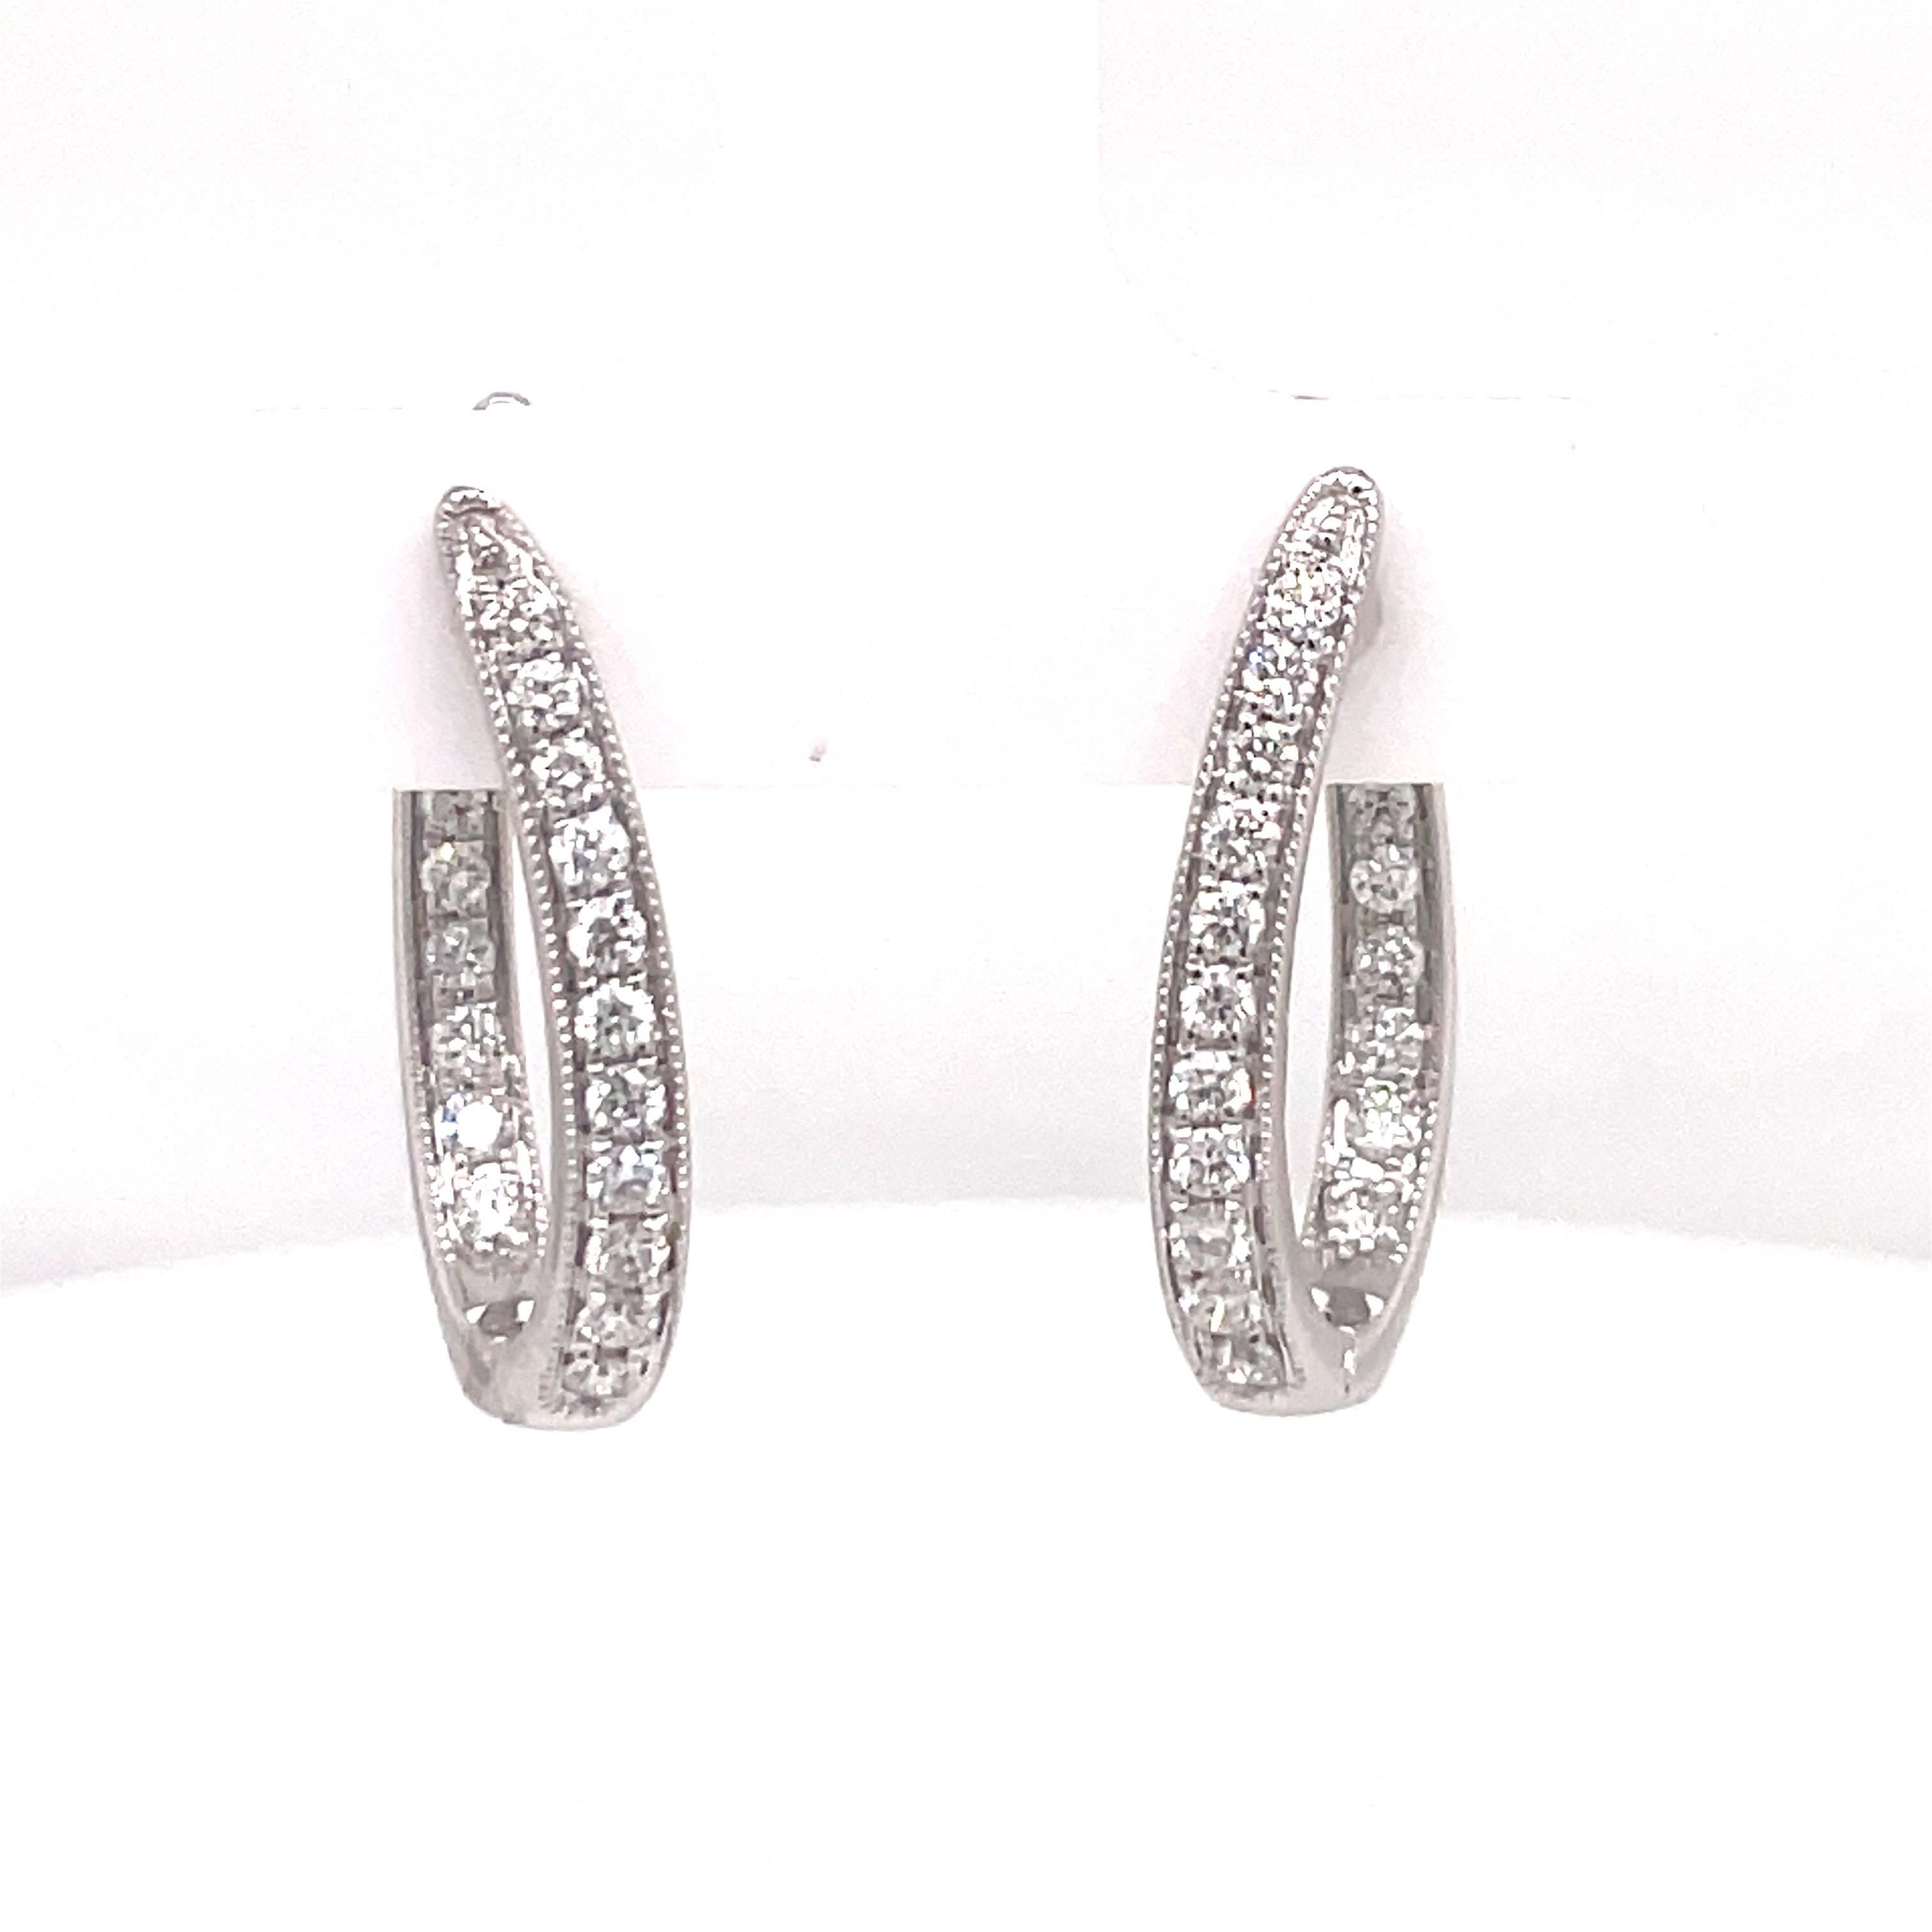 14 Karat White Gold hoop earrings featuring 38 round brilliants weighing 0.65 carats in a milgrain design. 
Color G-H
Clarity SI
Available in Yellow Gold